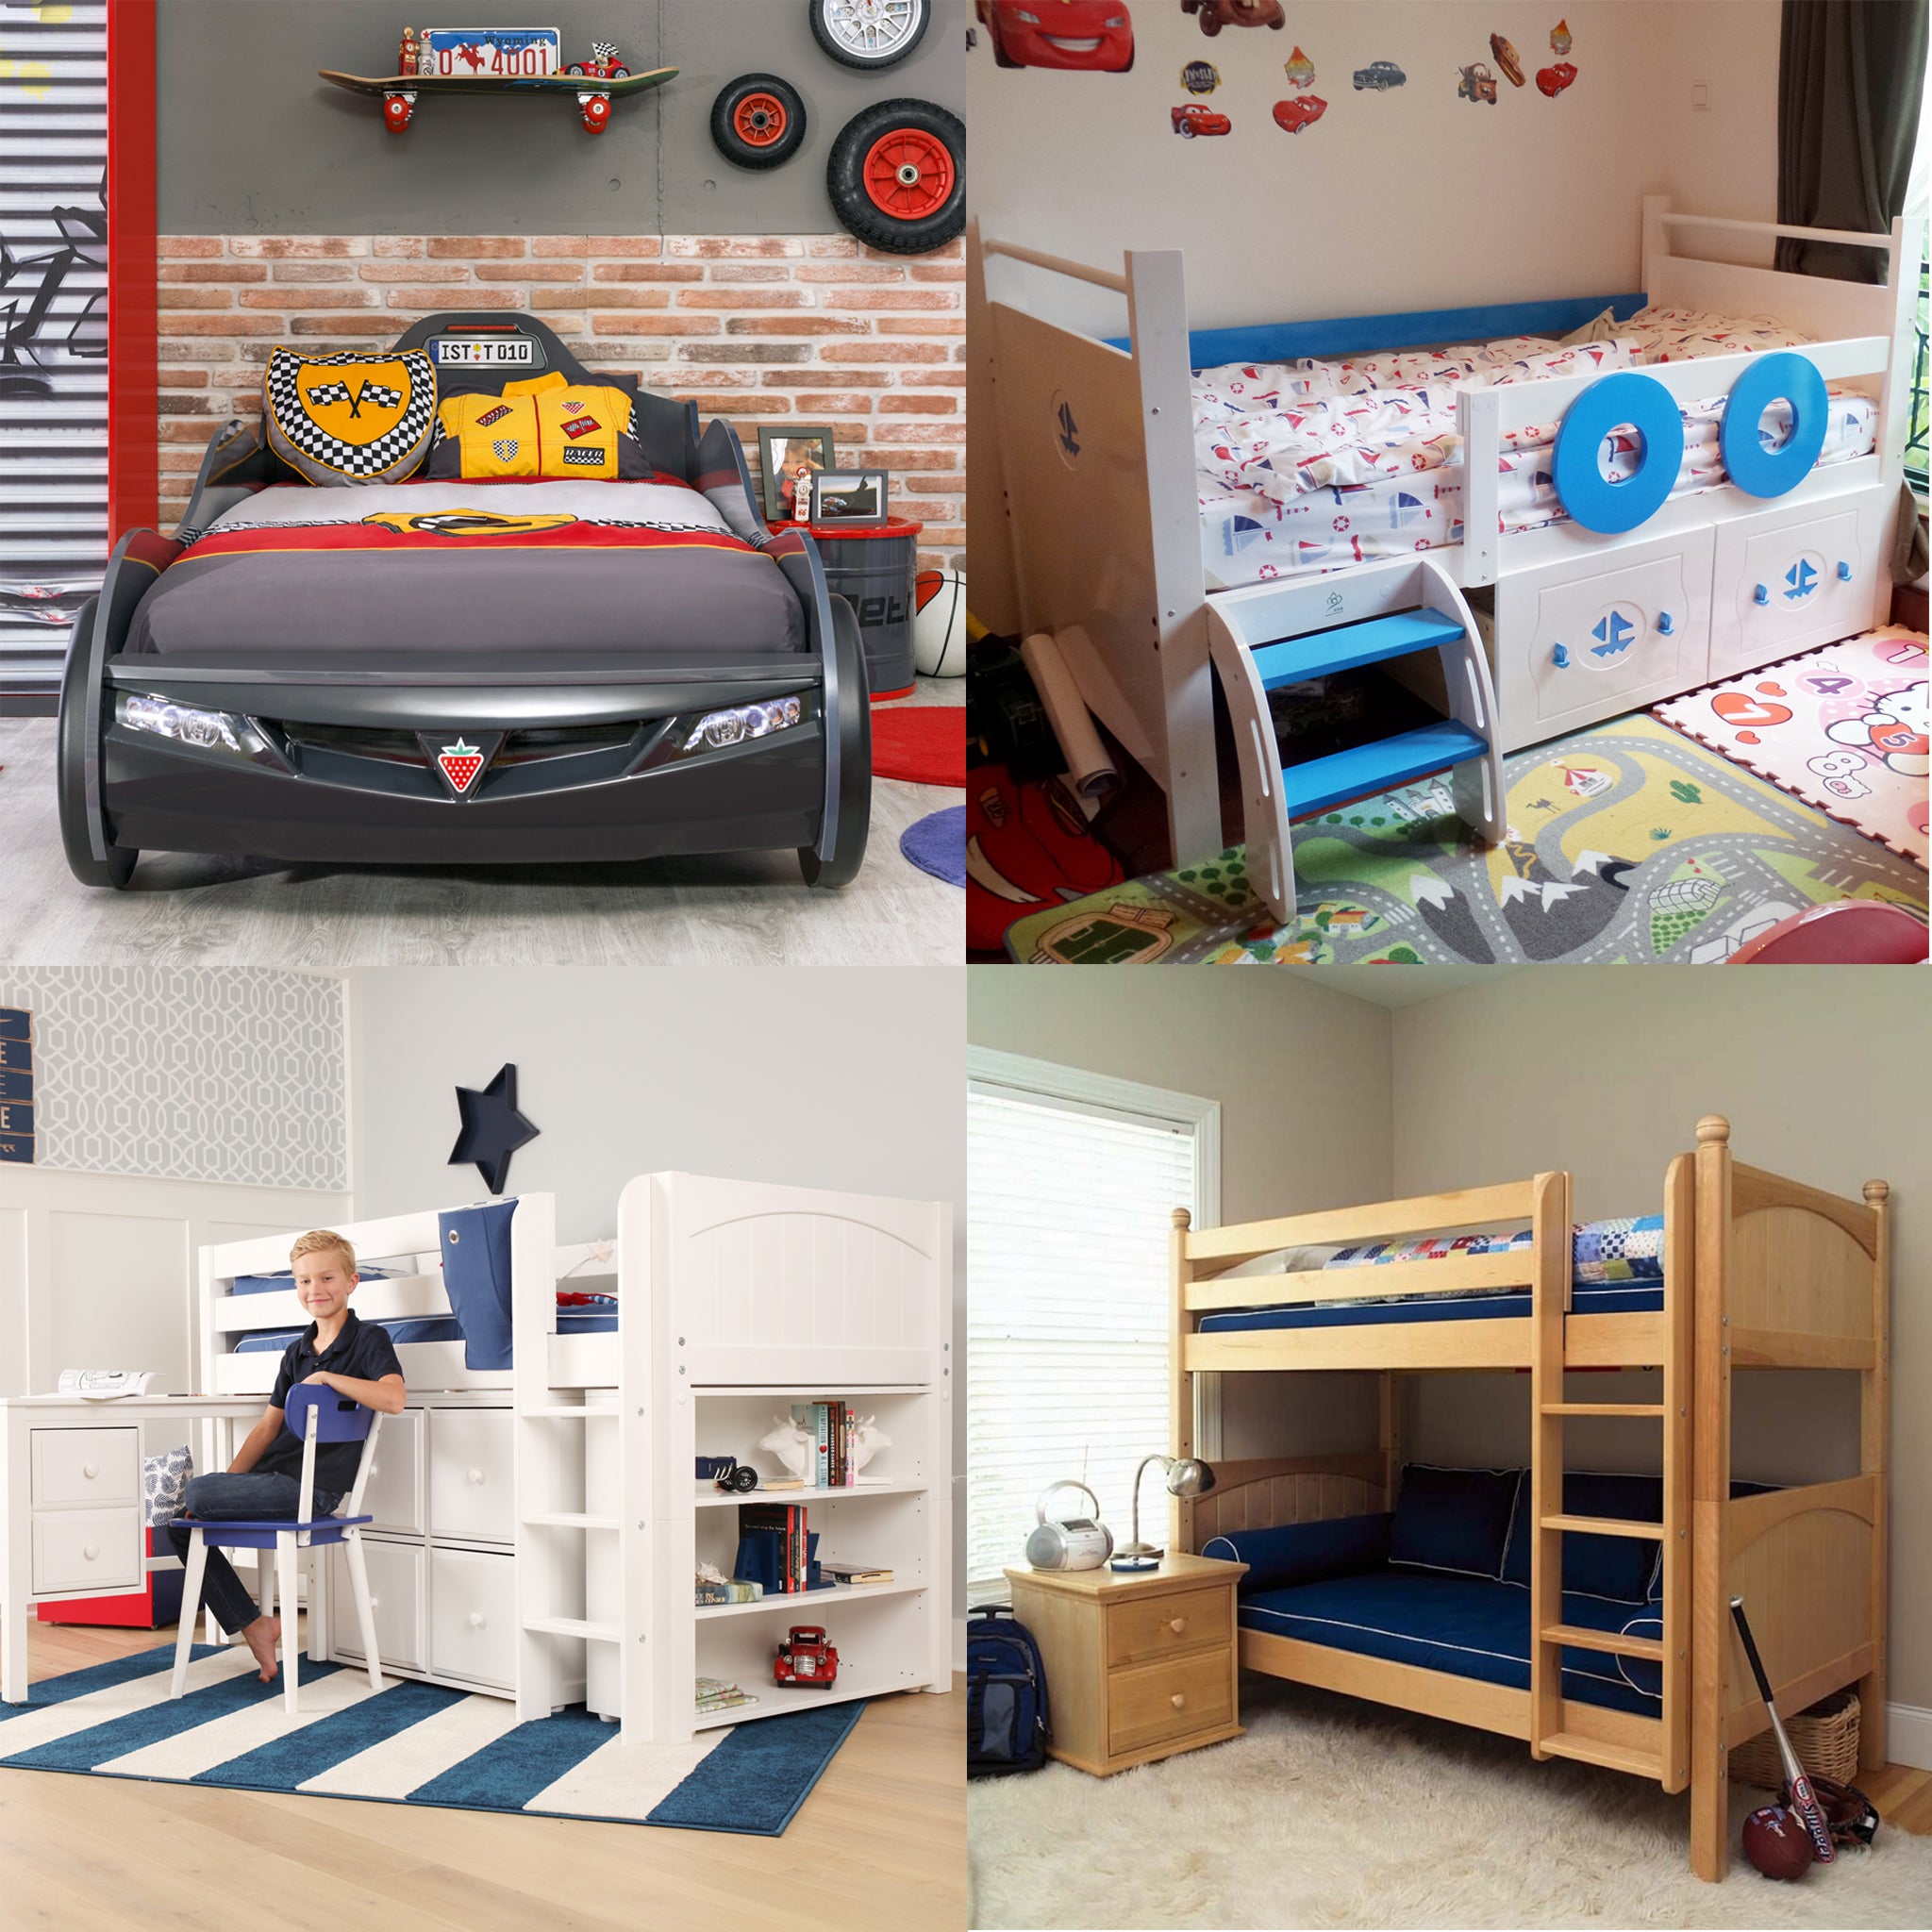 girl car bed for toddlers